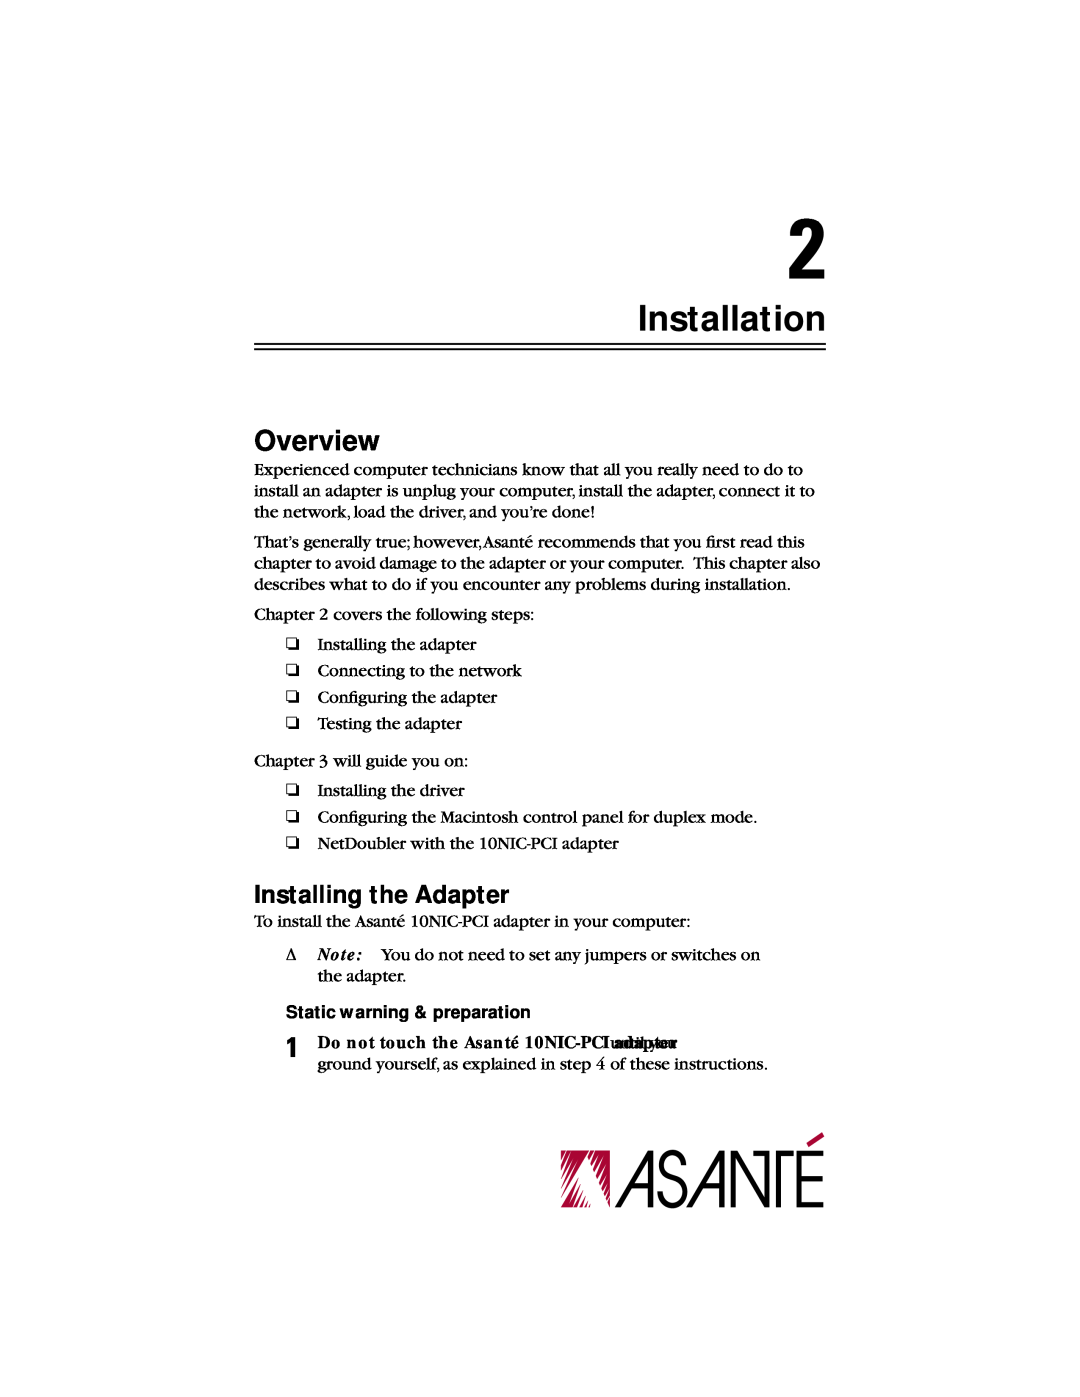 Asante Technologies 10NIC-PCITM manual Installation, Overview, Installing the Adapter, Static warning & preparation 